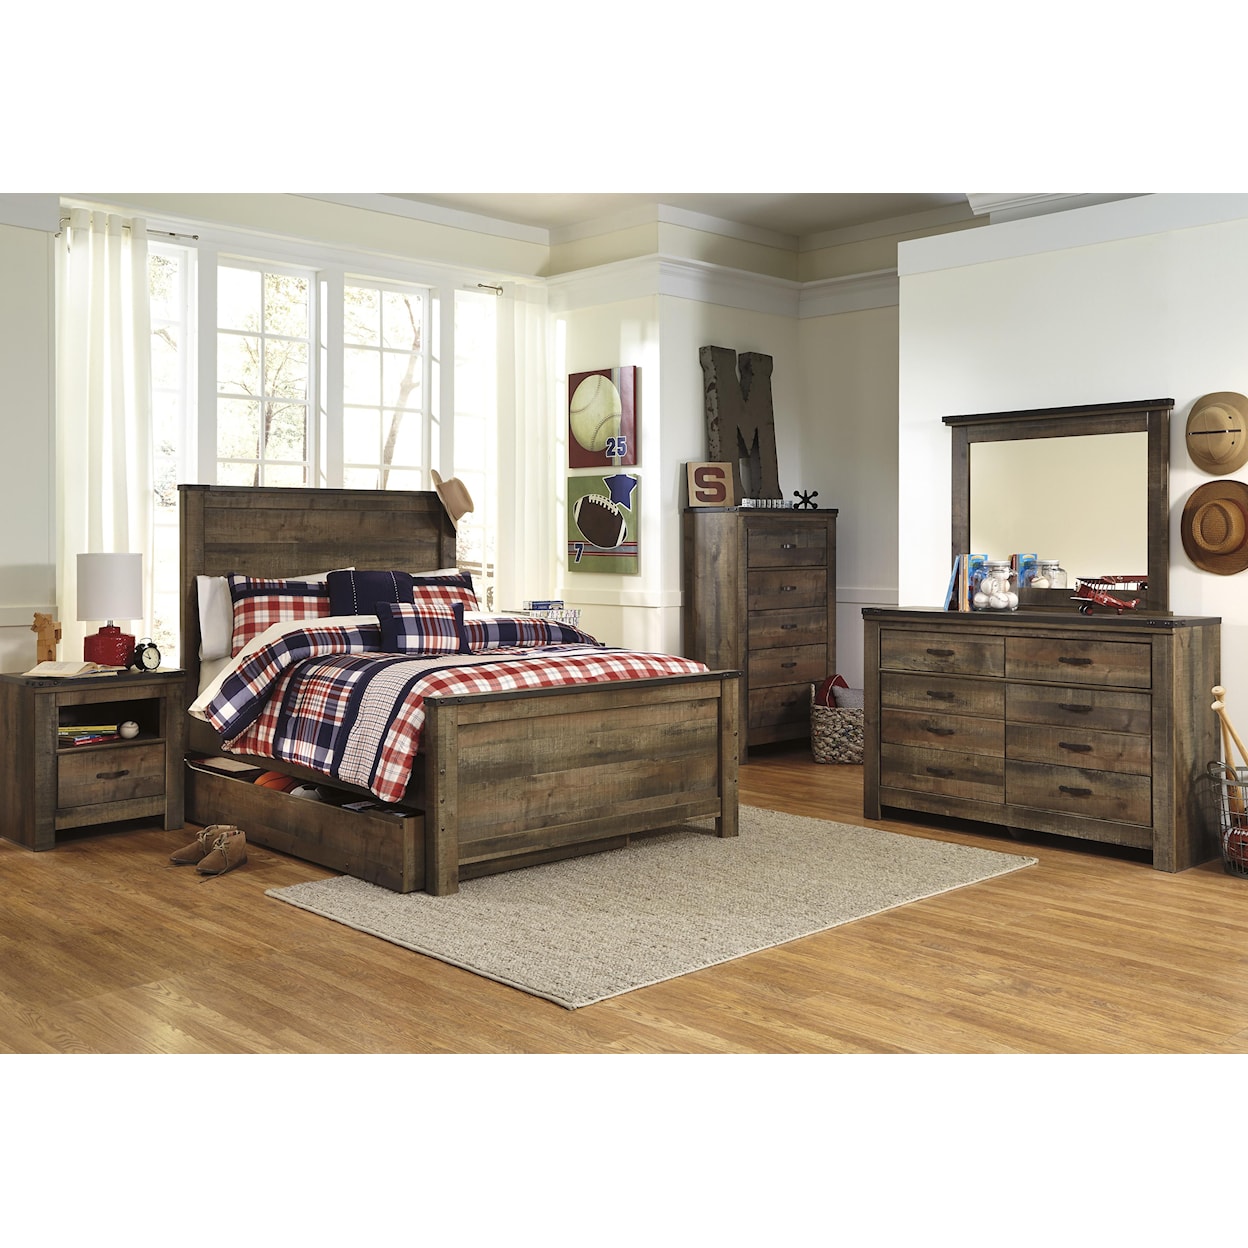 Signature Design by Ashley Trinell 7pc Full Bedroom Group